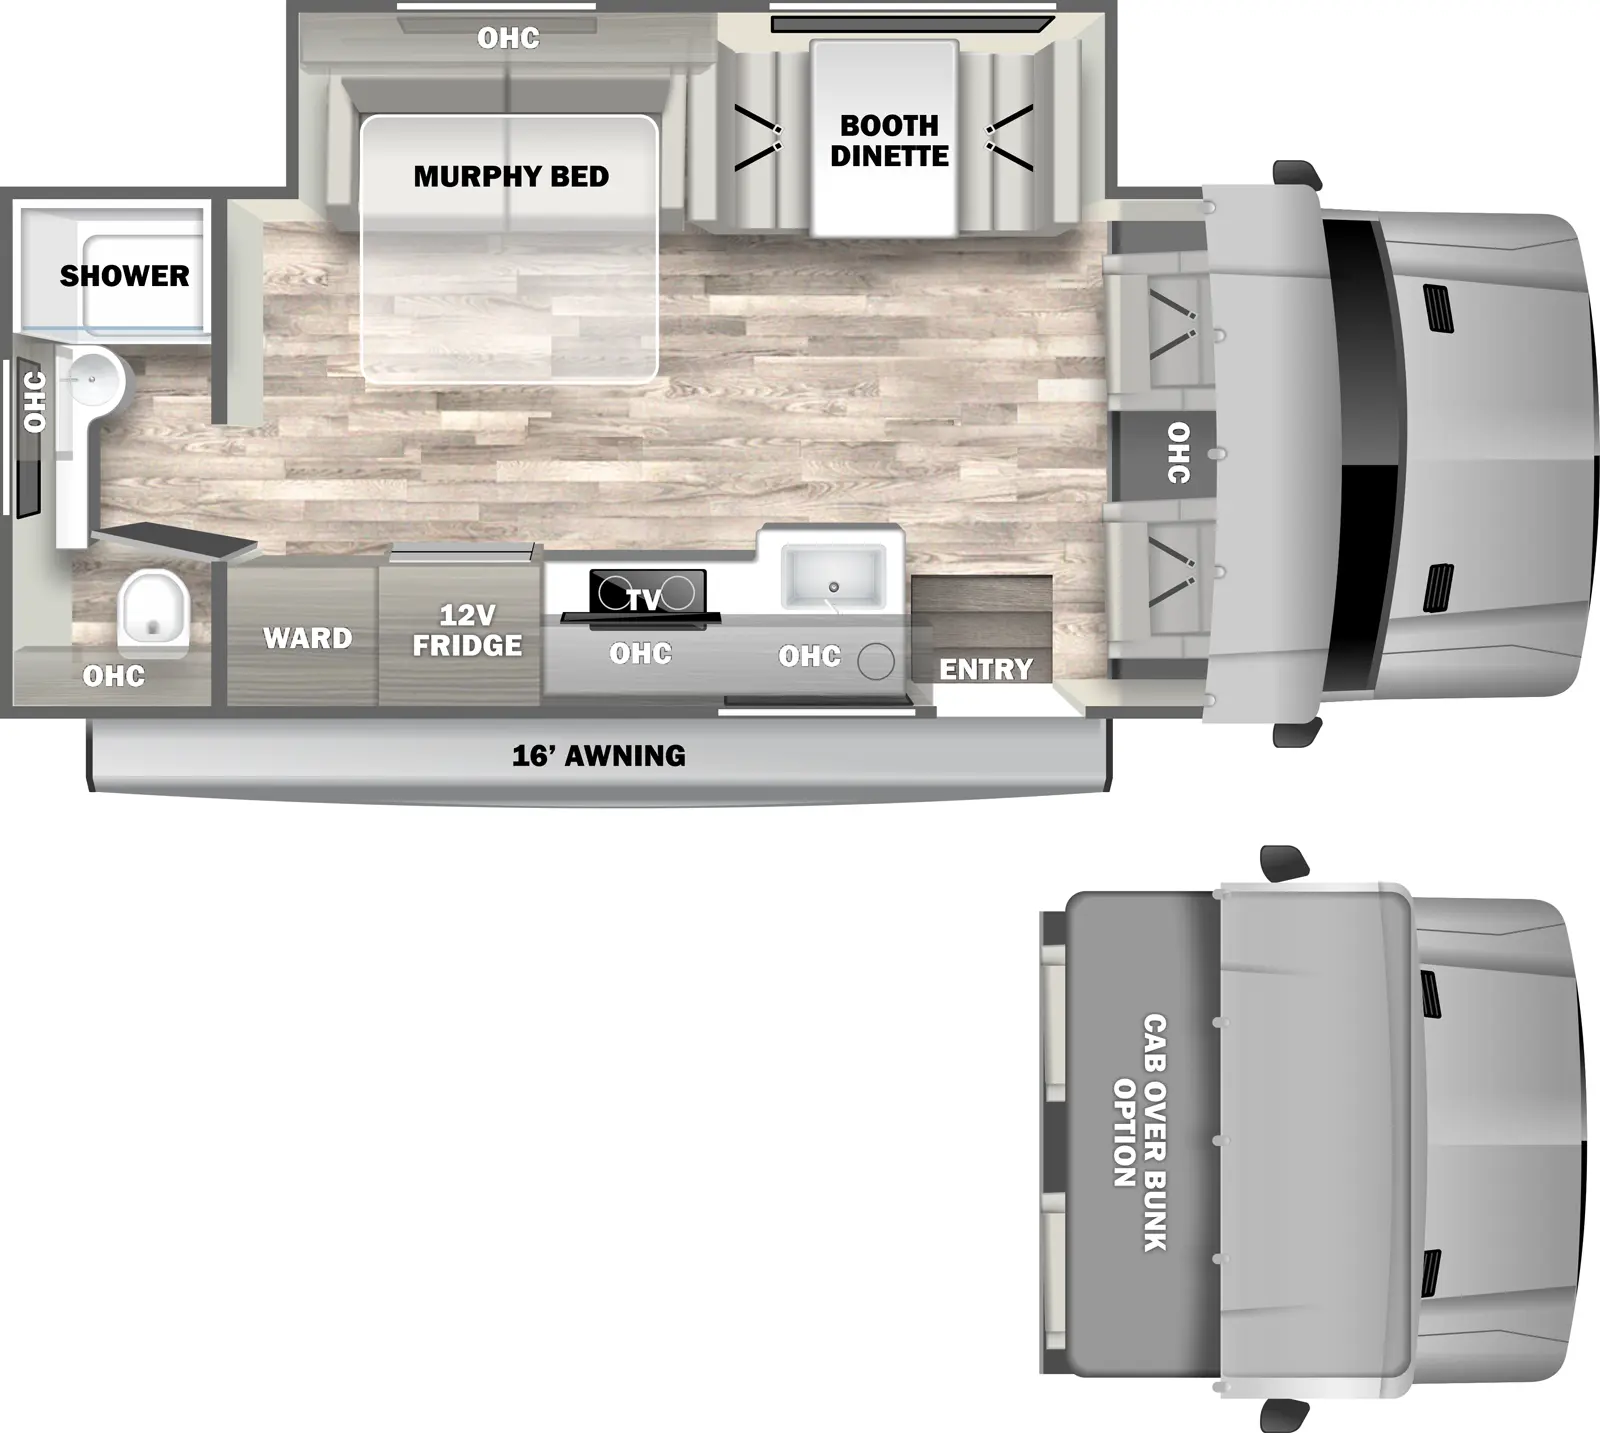 The 24SSSFXM has one slideout and one entry. Exterior features a 16 foot awning. Interior layout front to back: front cab (cabover bunk optional); off-door side slideout with booth dinette, murphy bed, and overhead cabinet; door side entry, kitchen counter with sink and cooktop, overhead cabinet with TV, 12V refrigerator, and wardrobe; rear full bathroom with overhead cabinets.